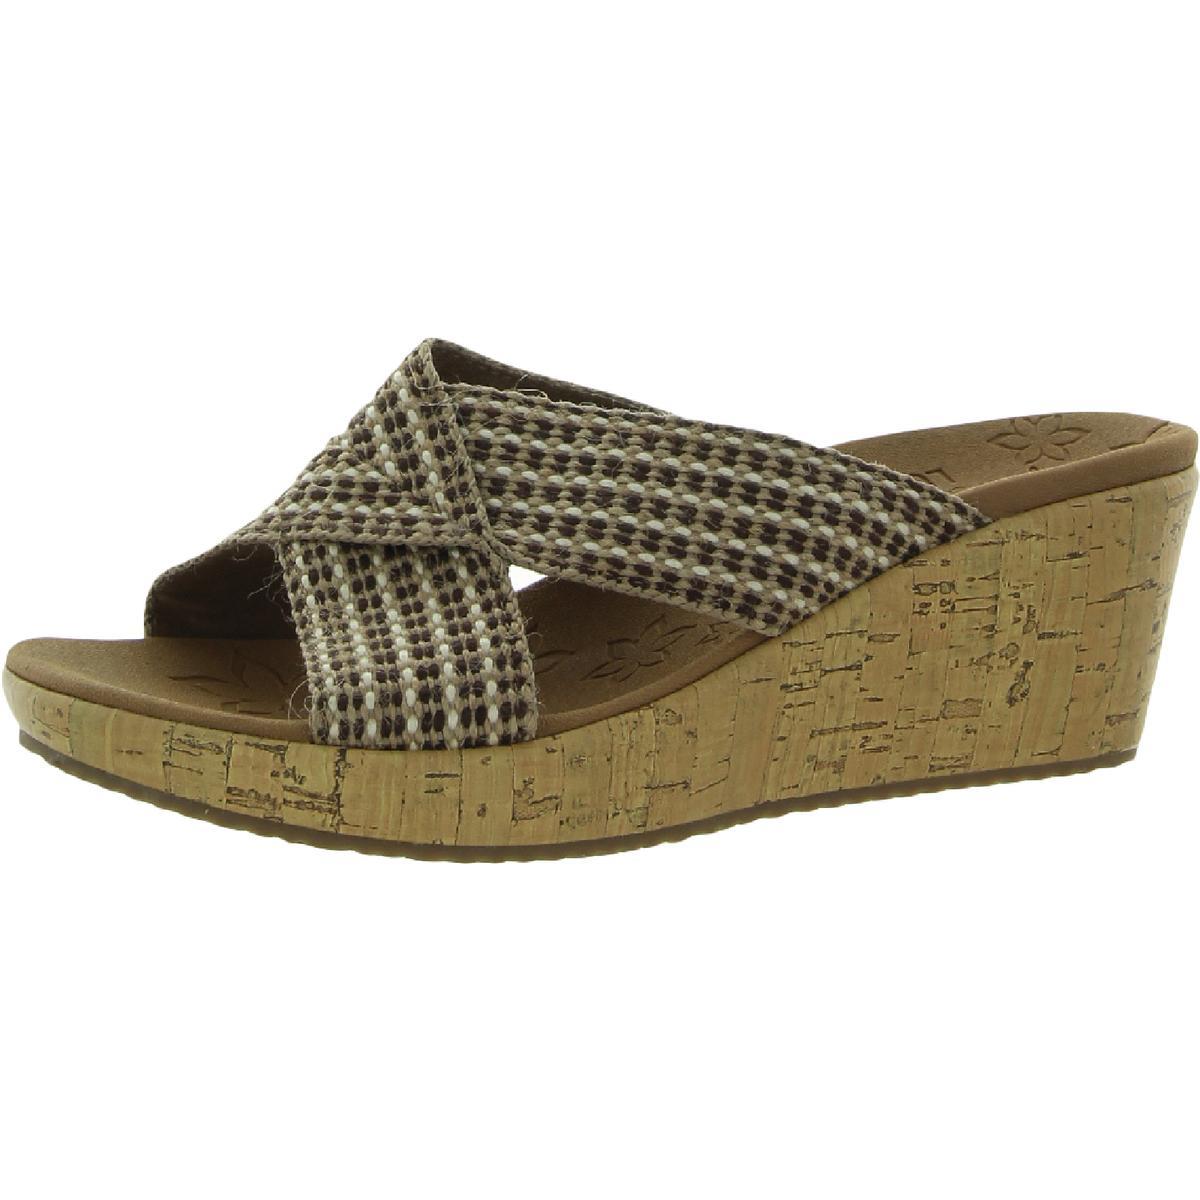 Skechers Womens Dressy Padded Insole Slip On Wedge Sandals Shoes Bhfo 6685 Natural